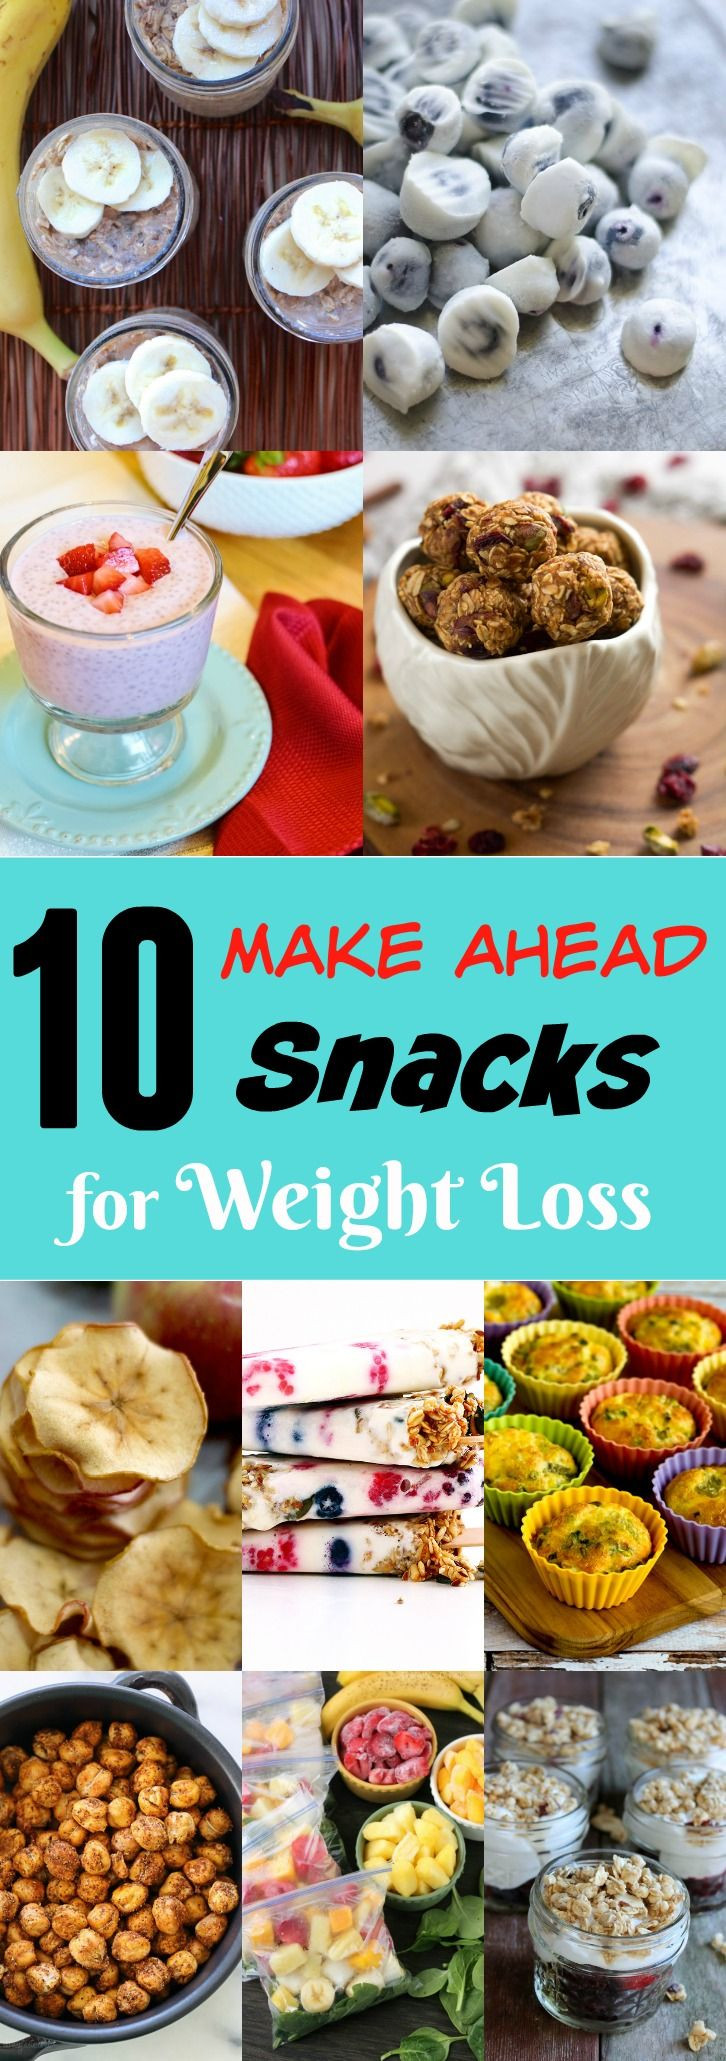 Healthy Snacks On The Go For Weight Loss
 Best 25 Weight loss camp ideas on Pinterest